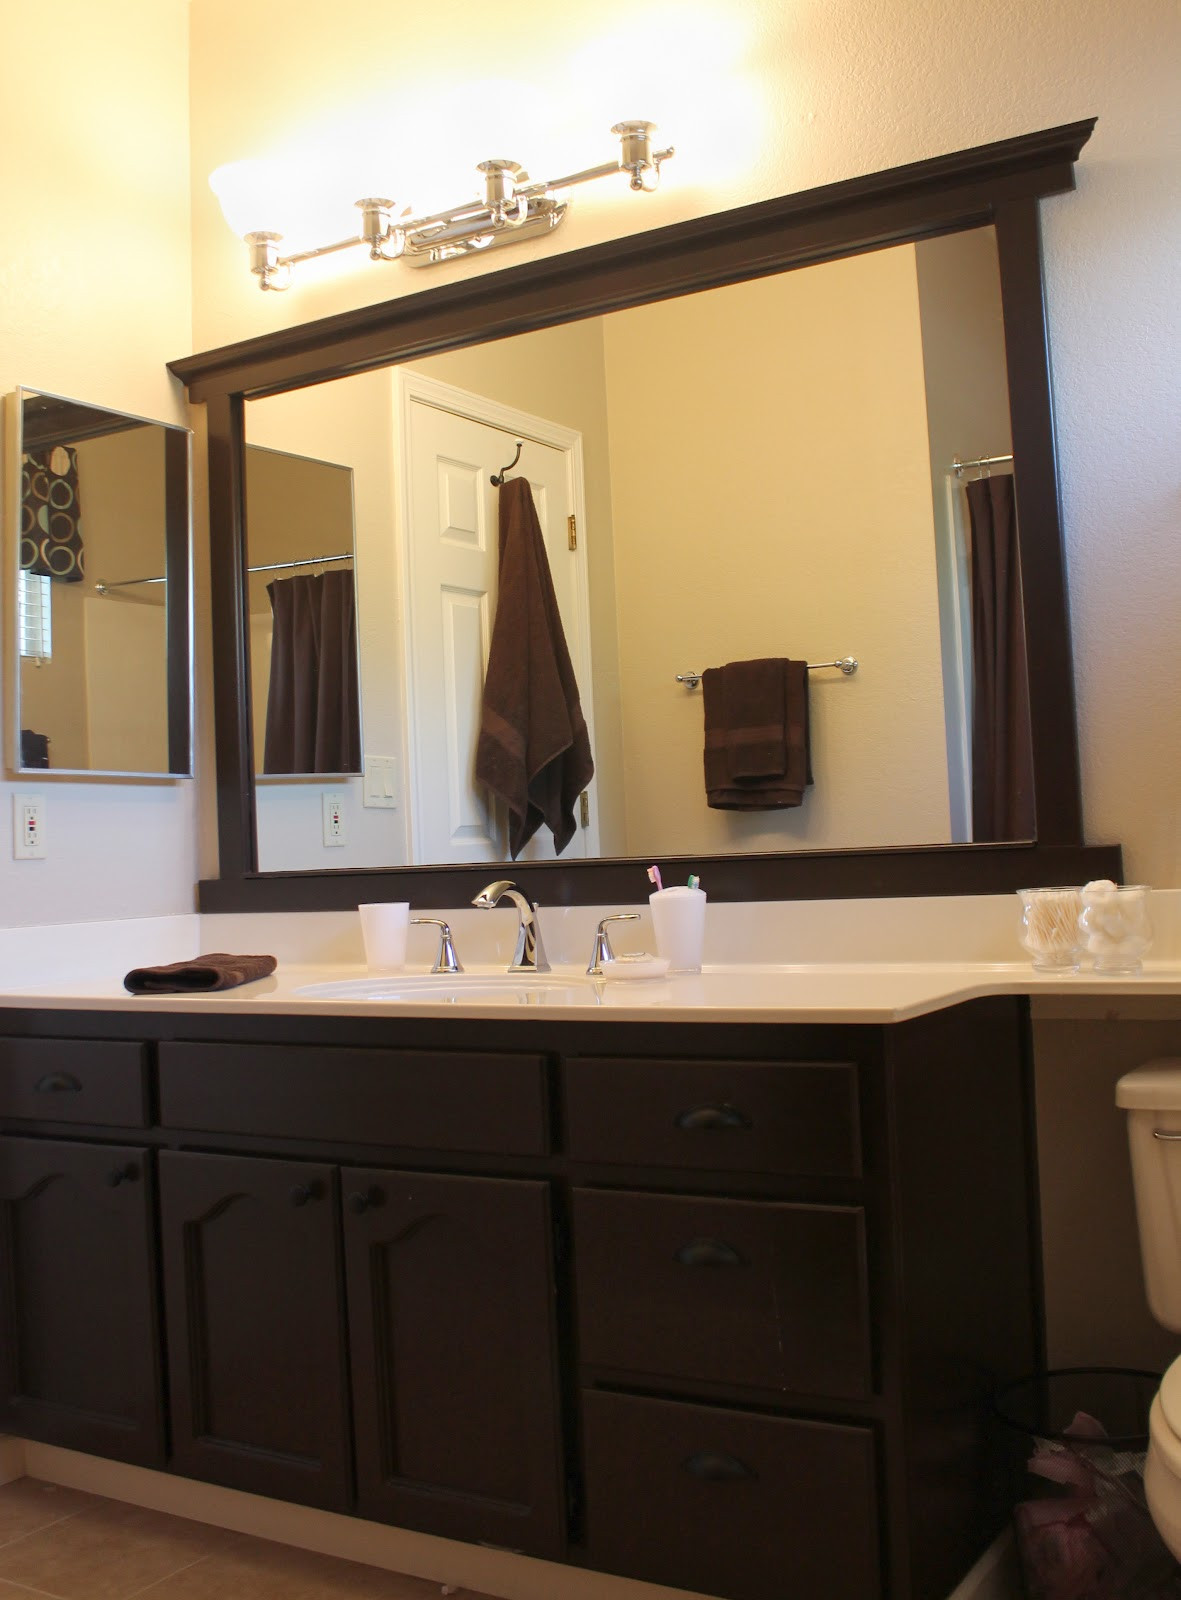 Framed Bathroom Mirrors
 I absolutely love how it came out It makes the whole